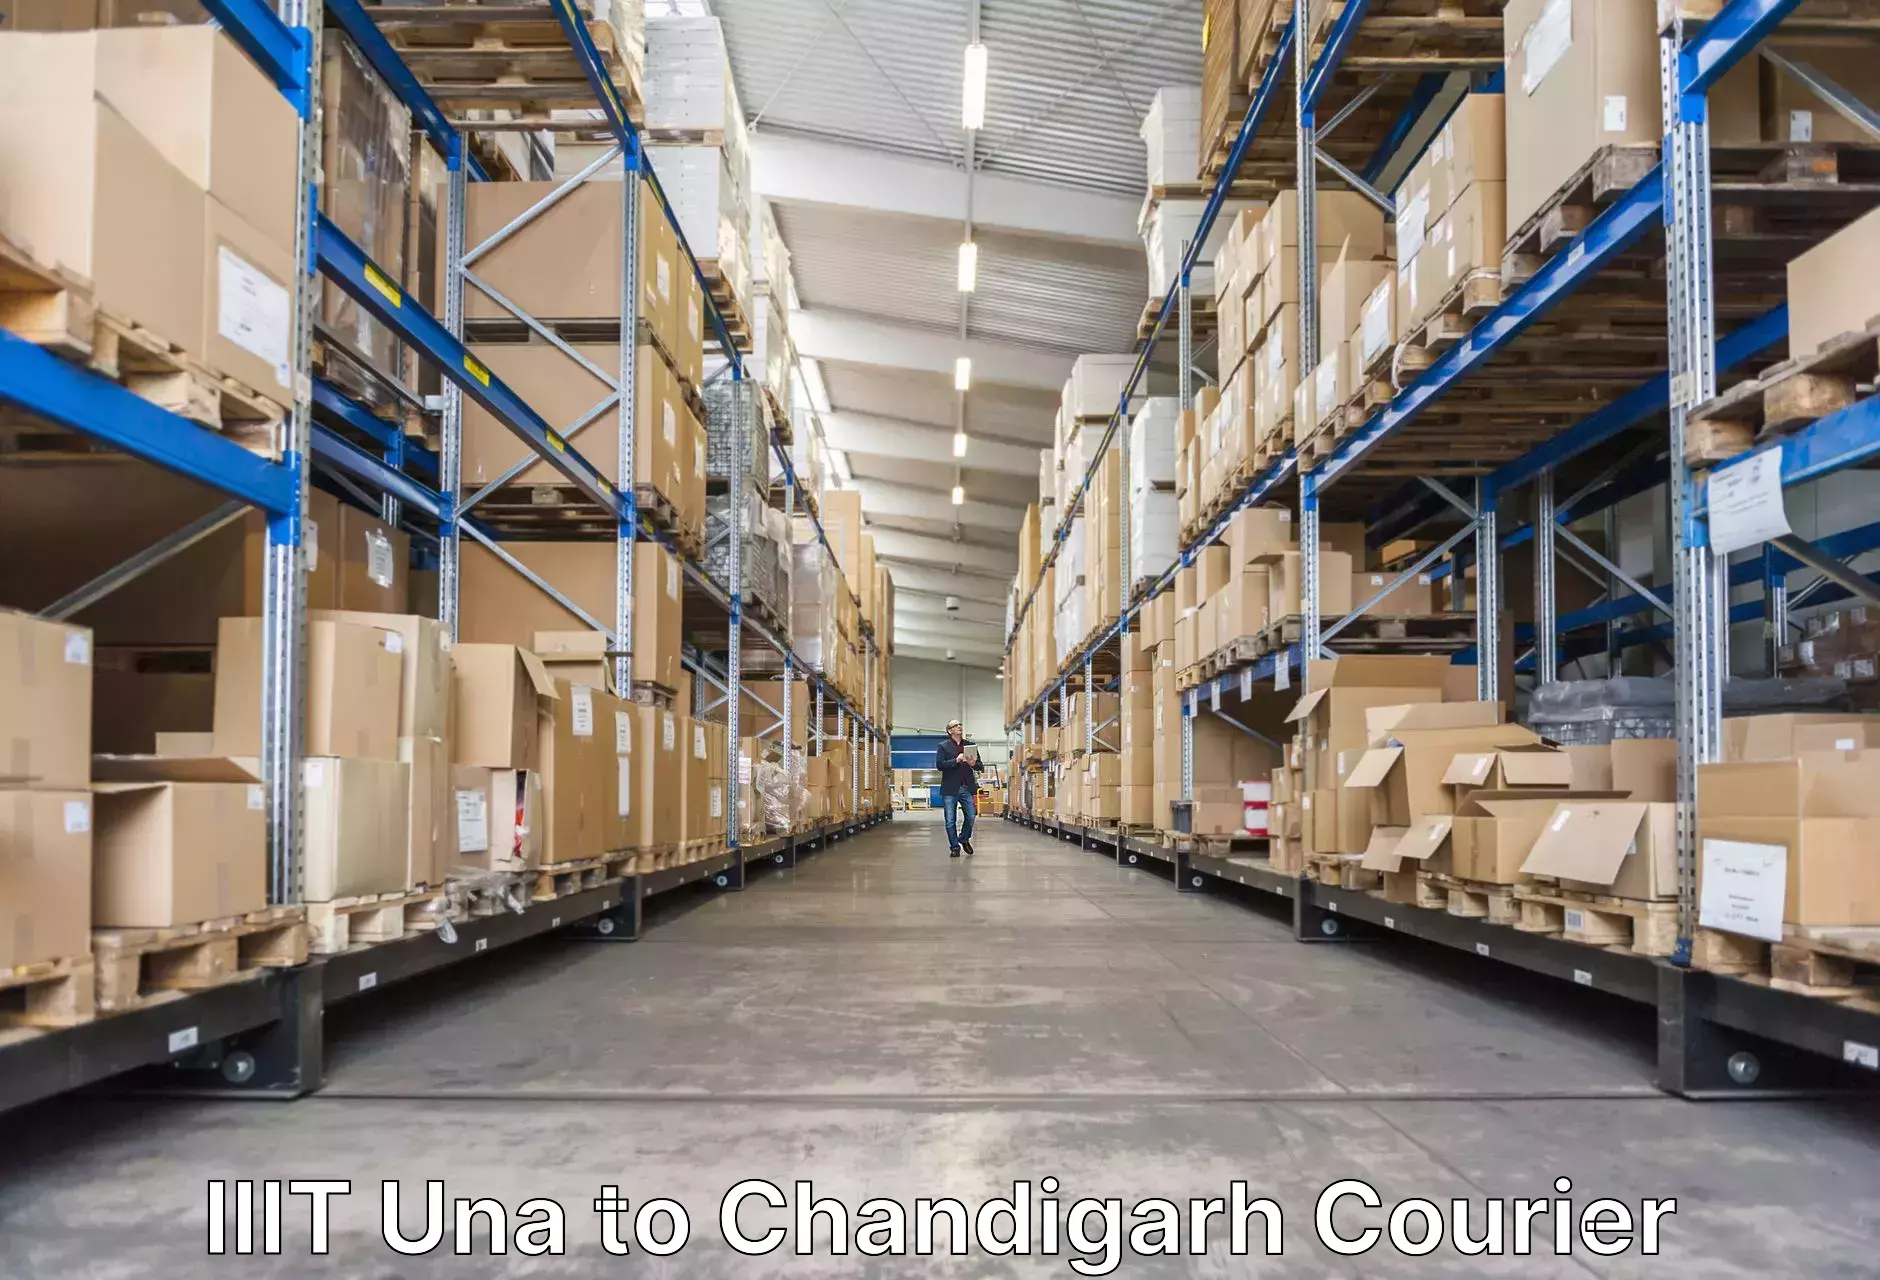 Baggage transport technology in IIIT Una to Chandigarh